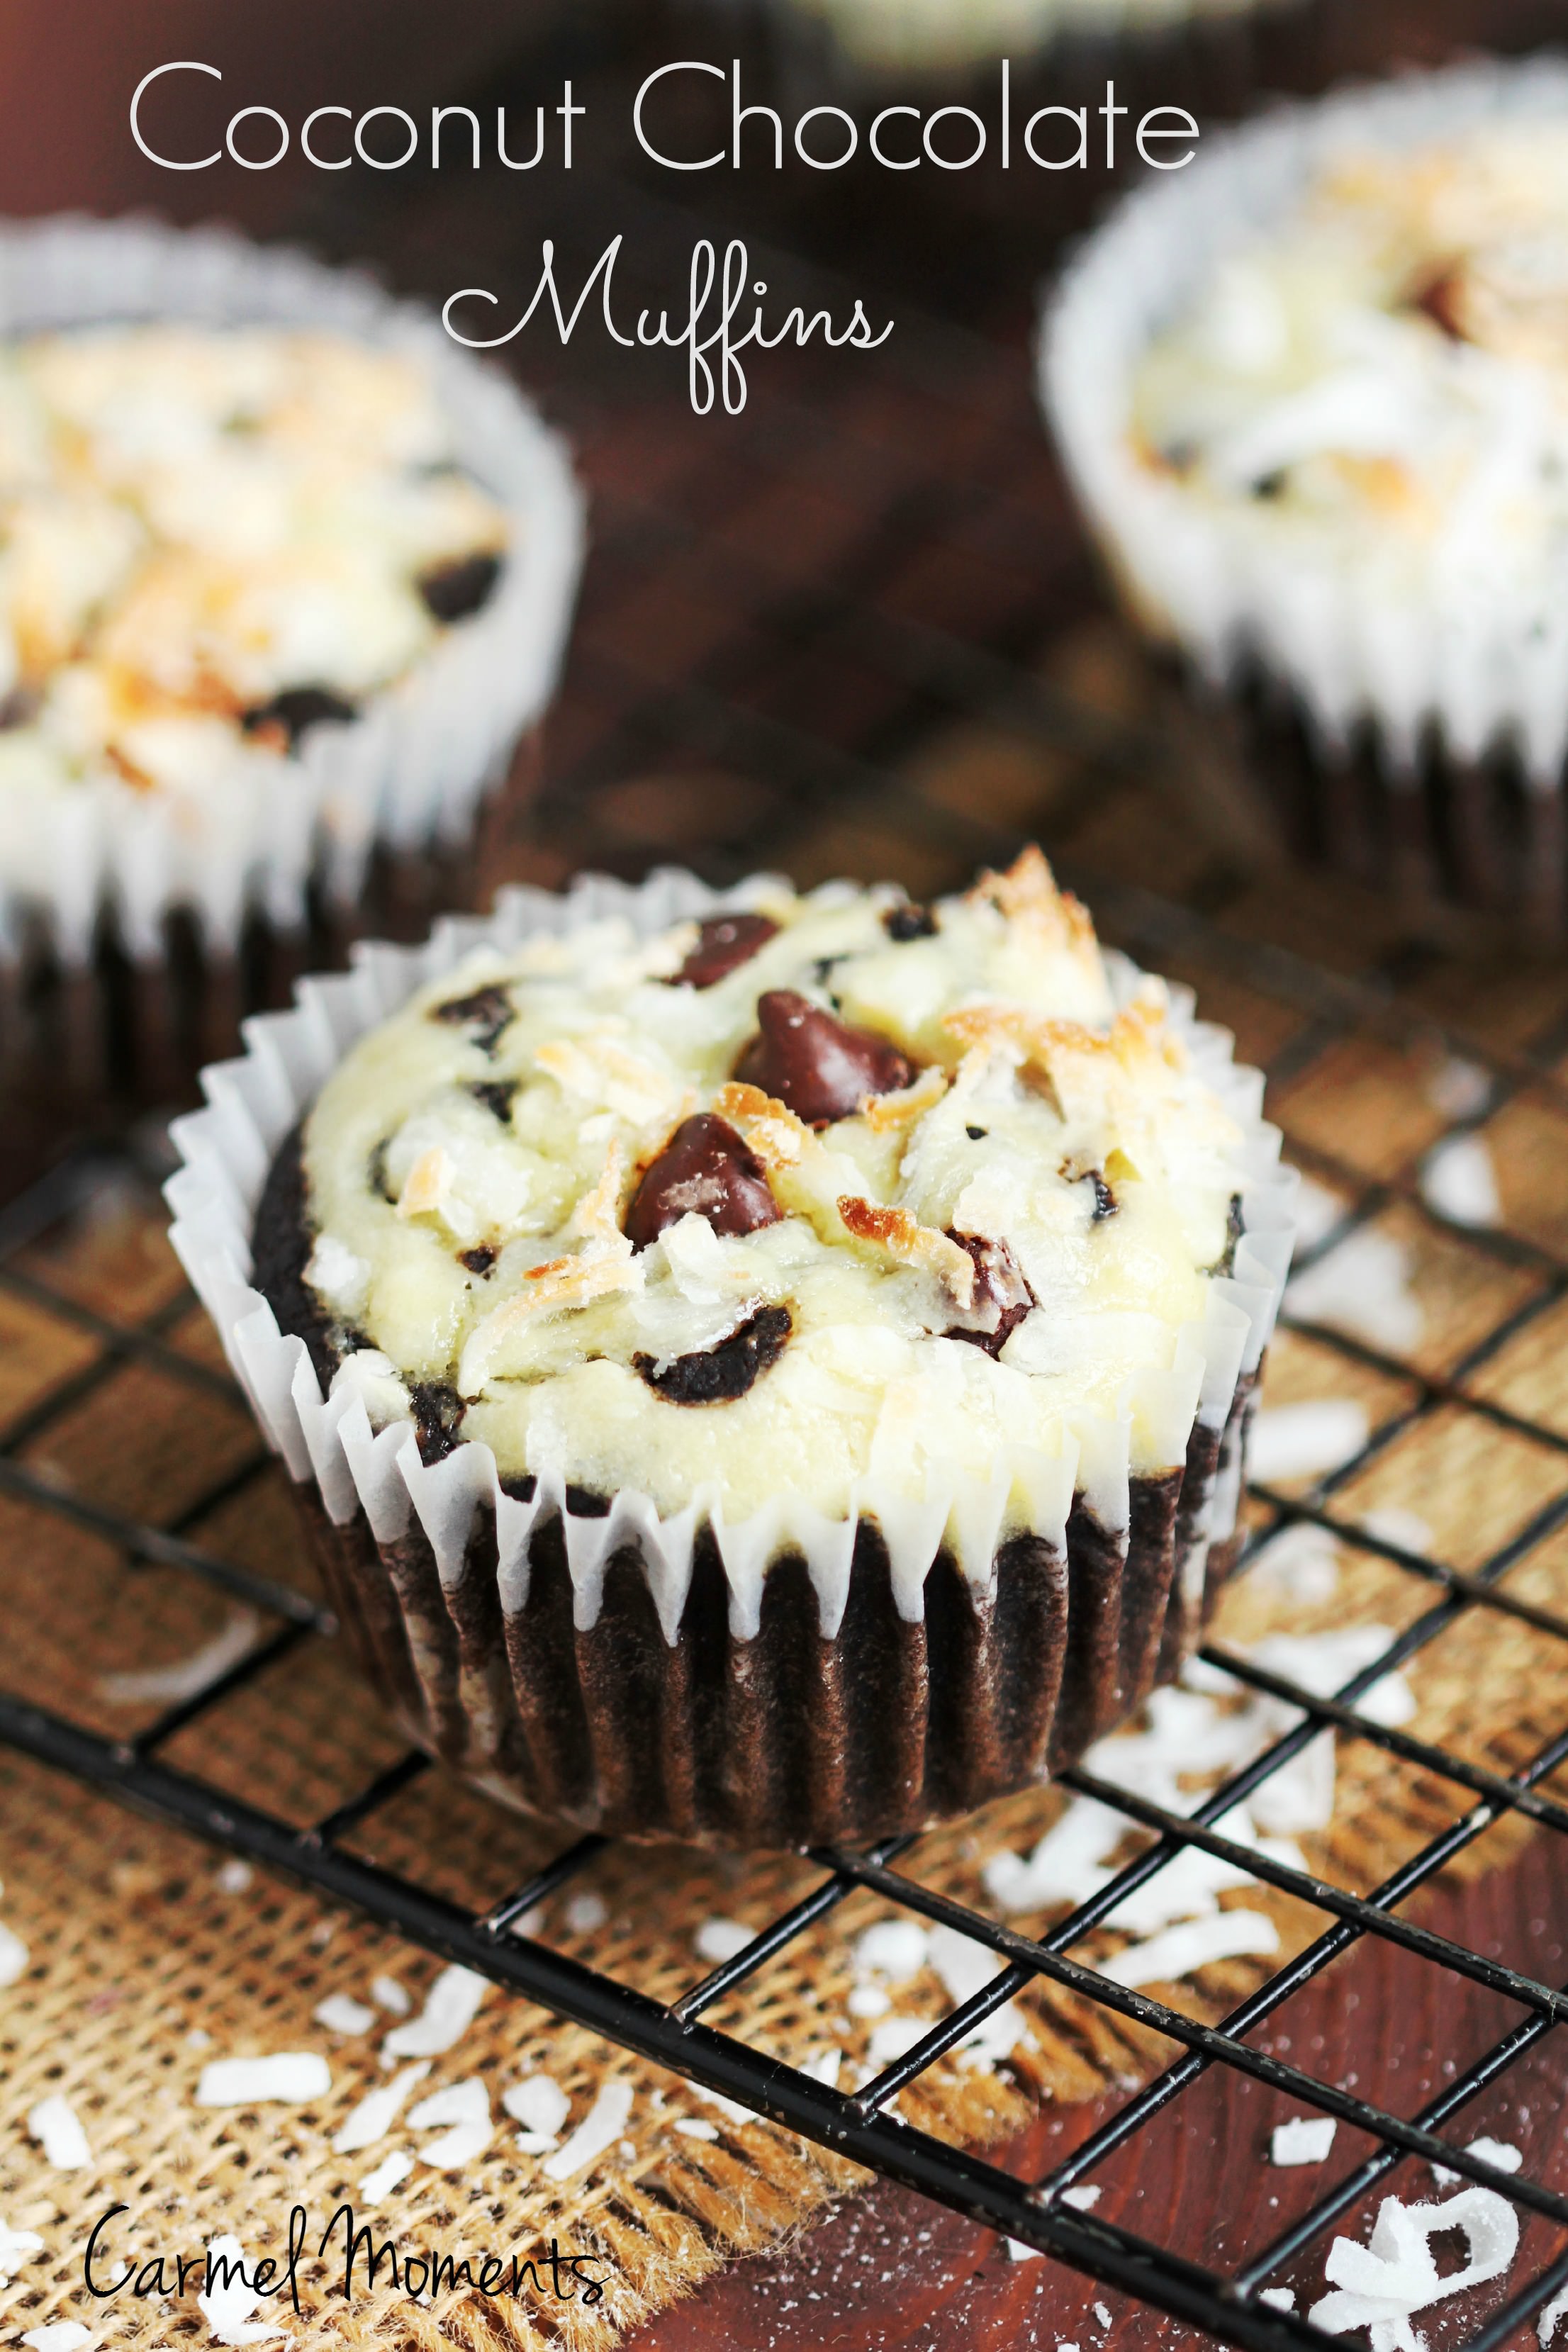 Coconut Chocolate Muffins